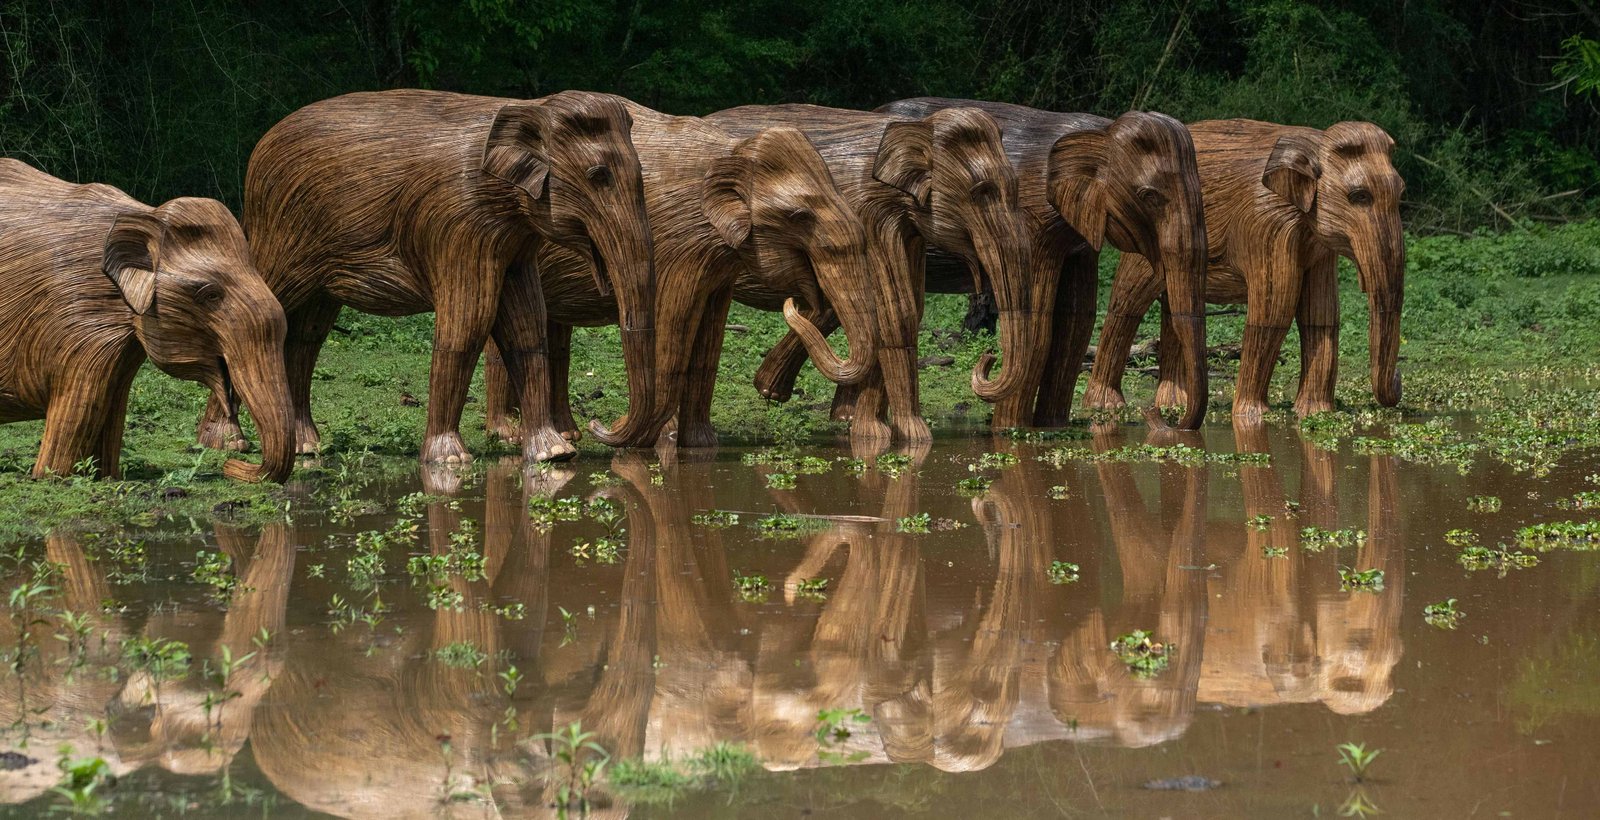 The Travelling Band of Elephants